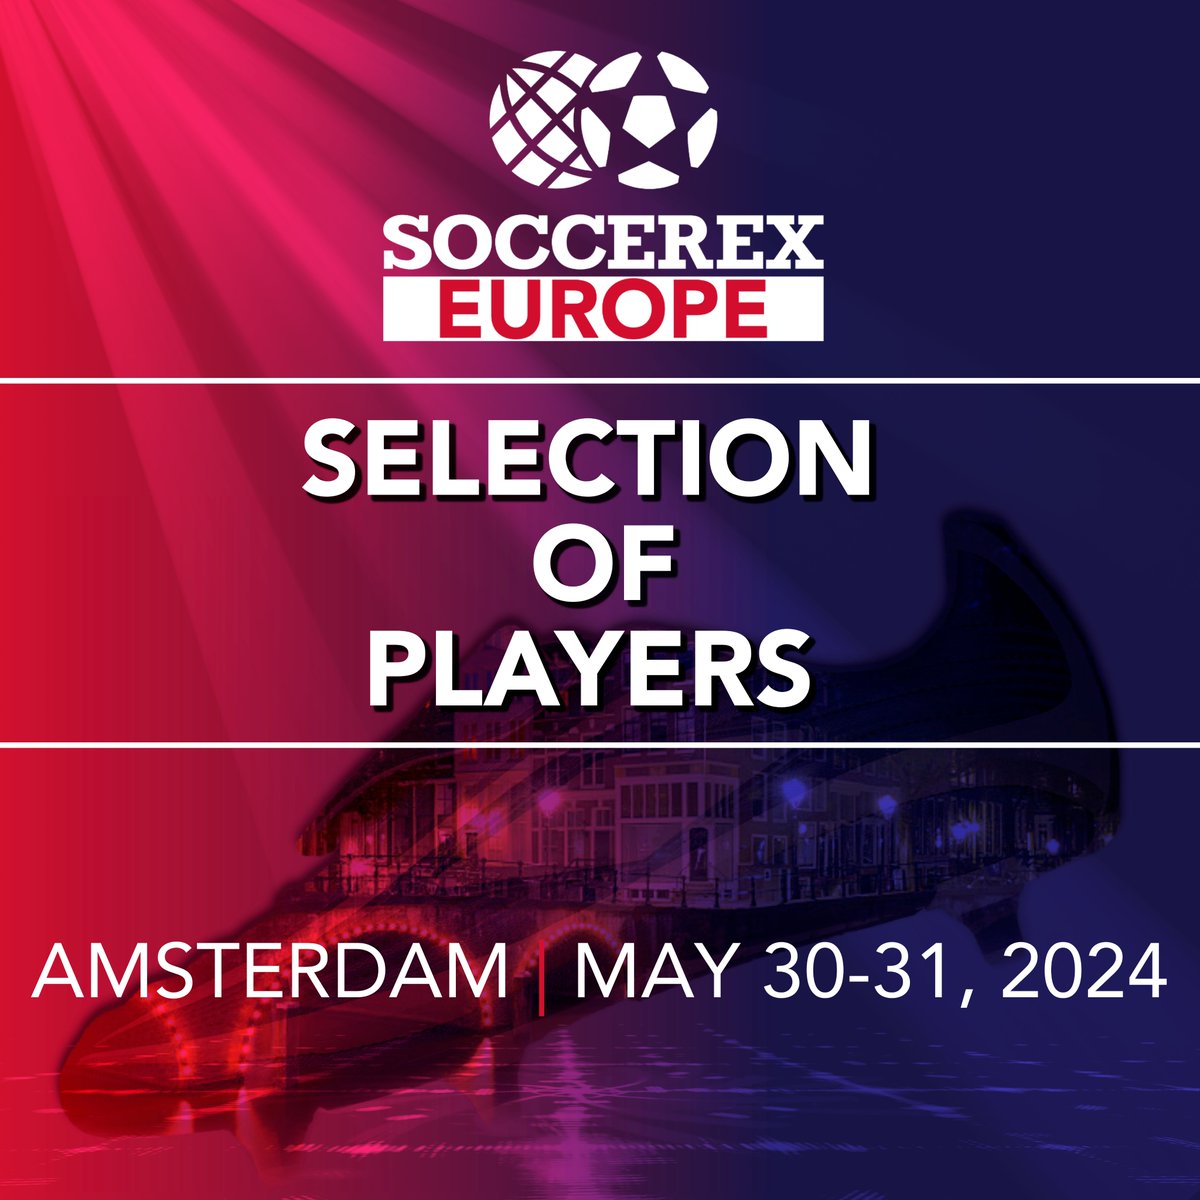 We are excited to announce a new Selection of Players for #soccerexeurope ⚽ 🇳🇱 soccerex.com/wp-content/upl…